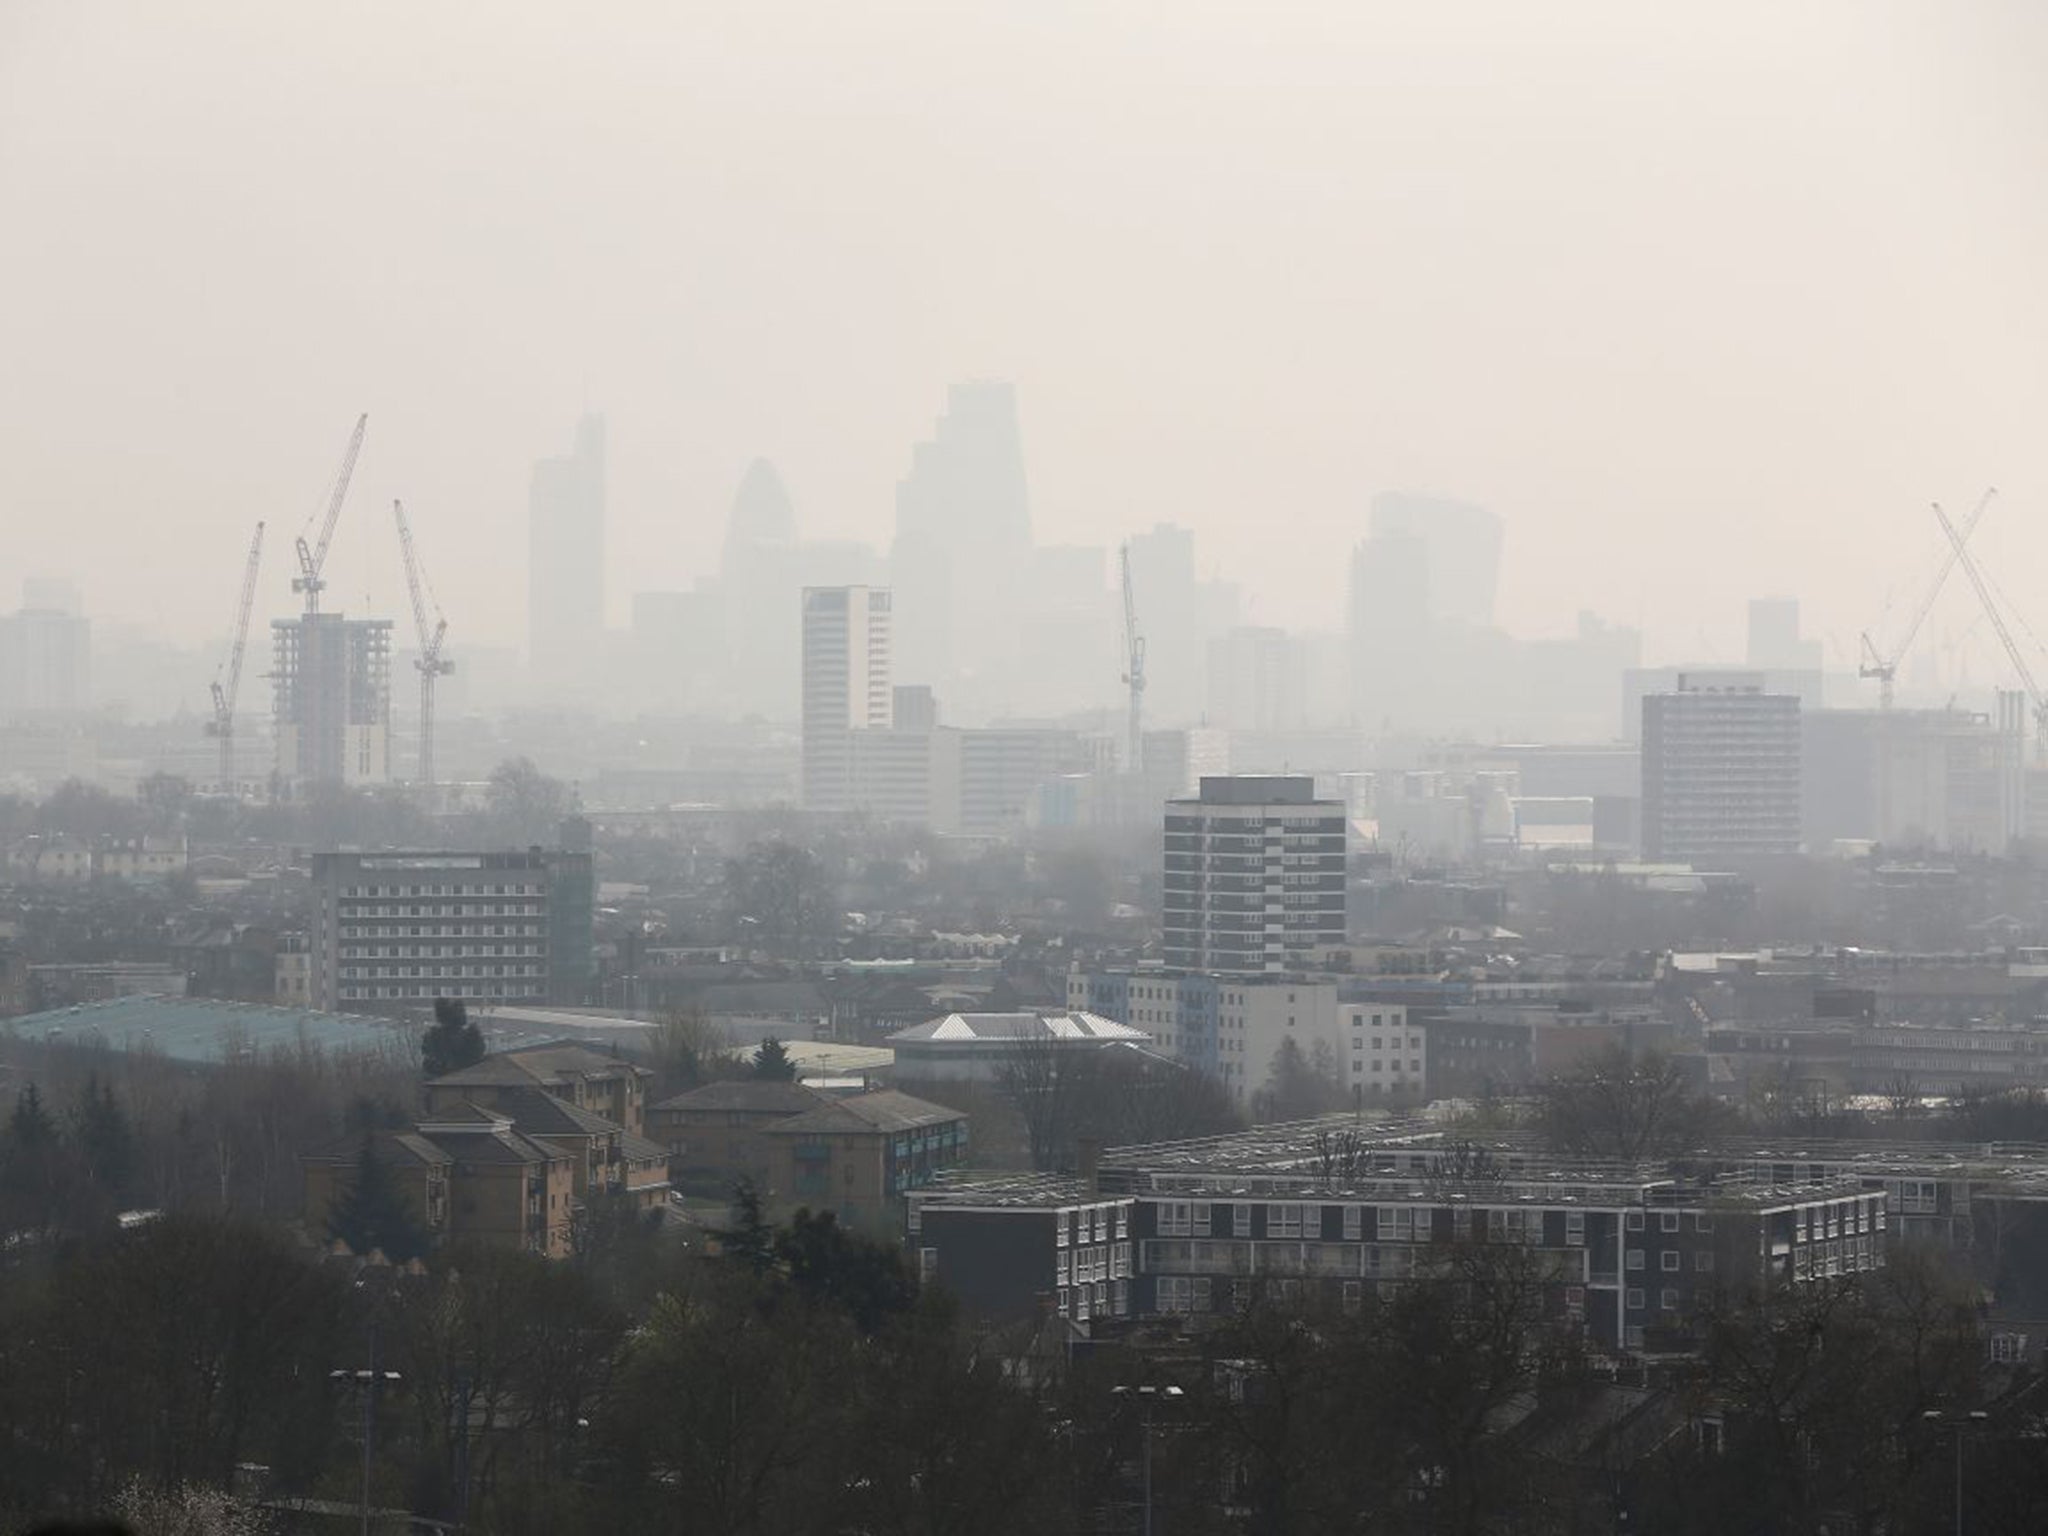 Smog blanketed much of central and southern England on Friday, including the City of London